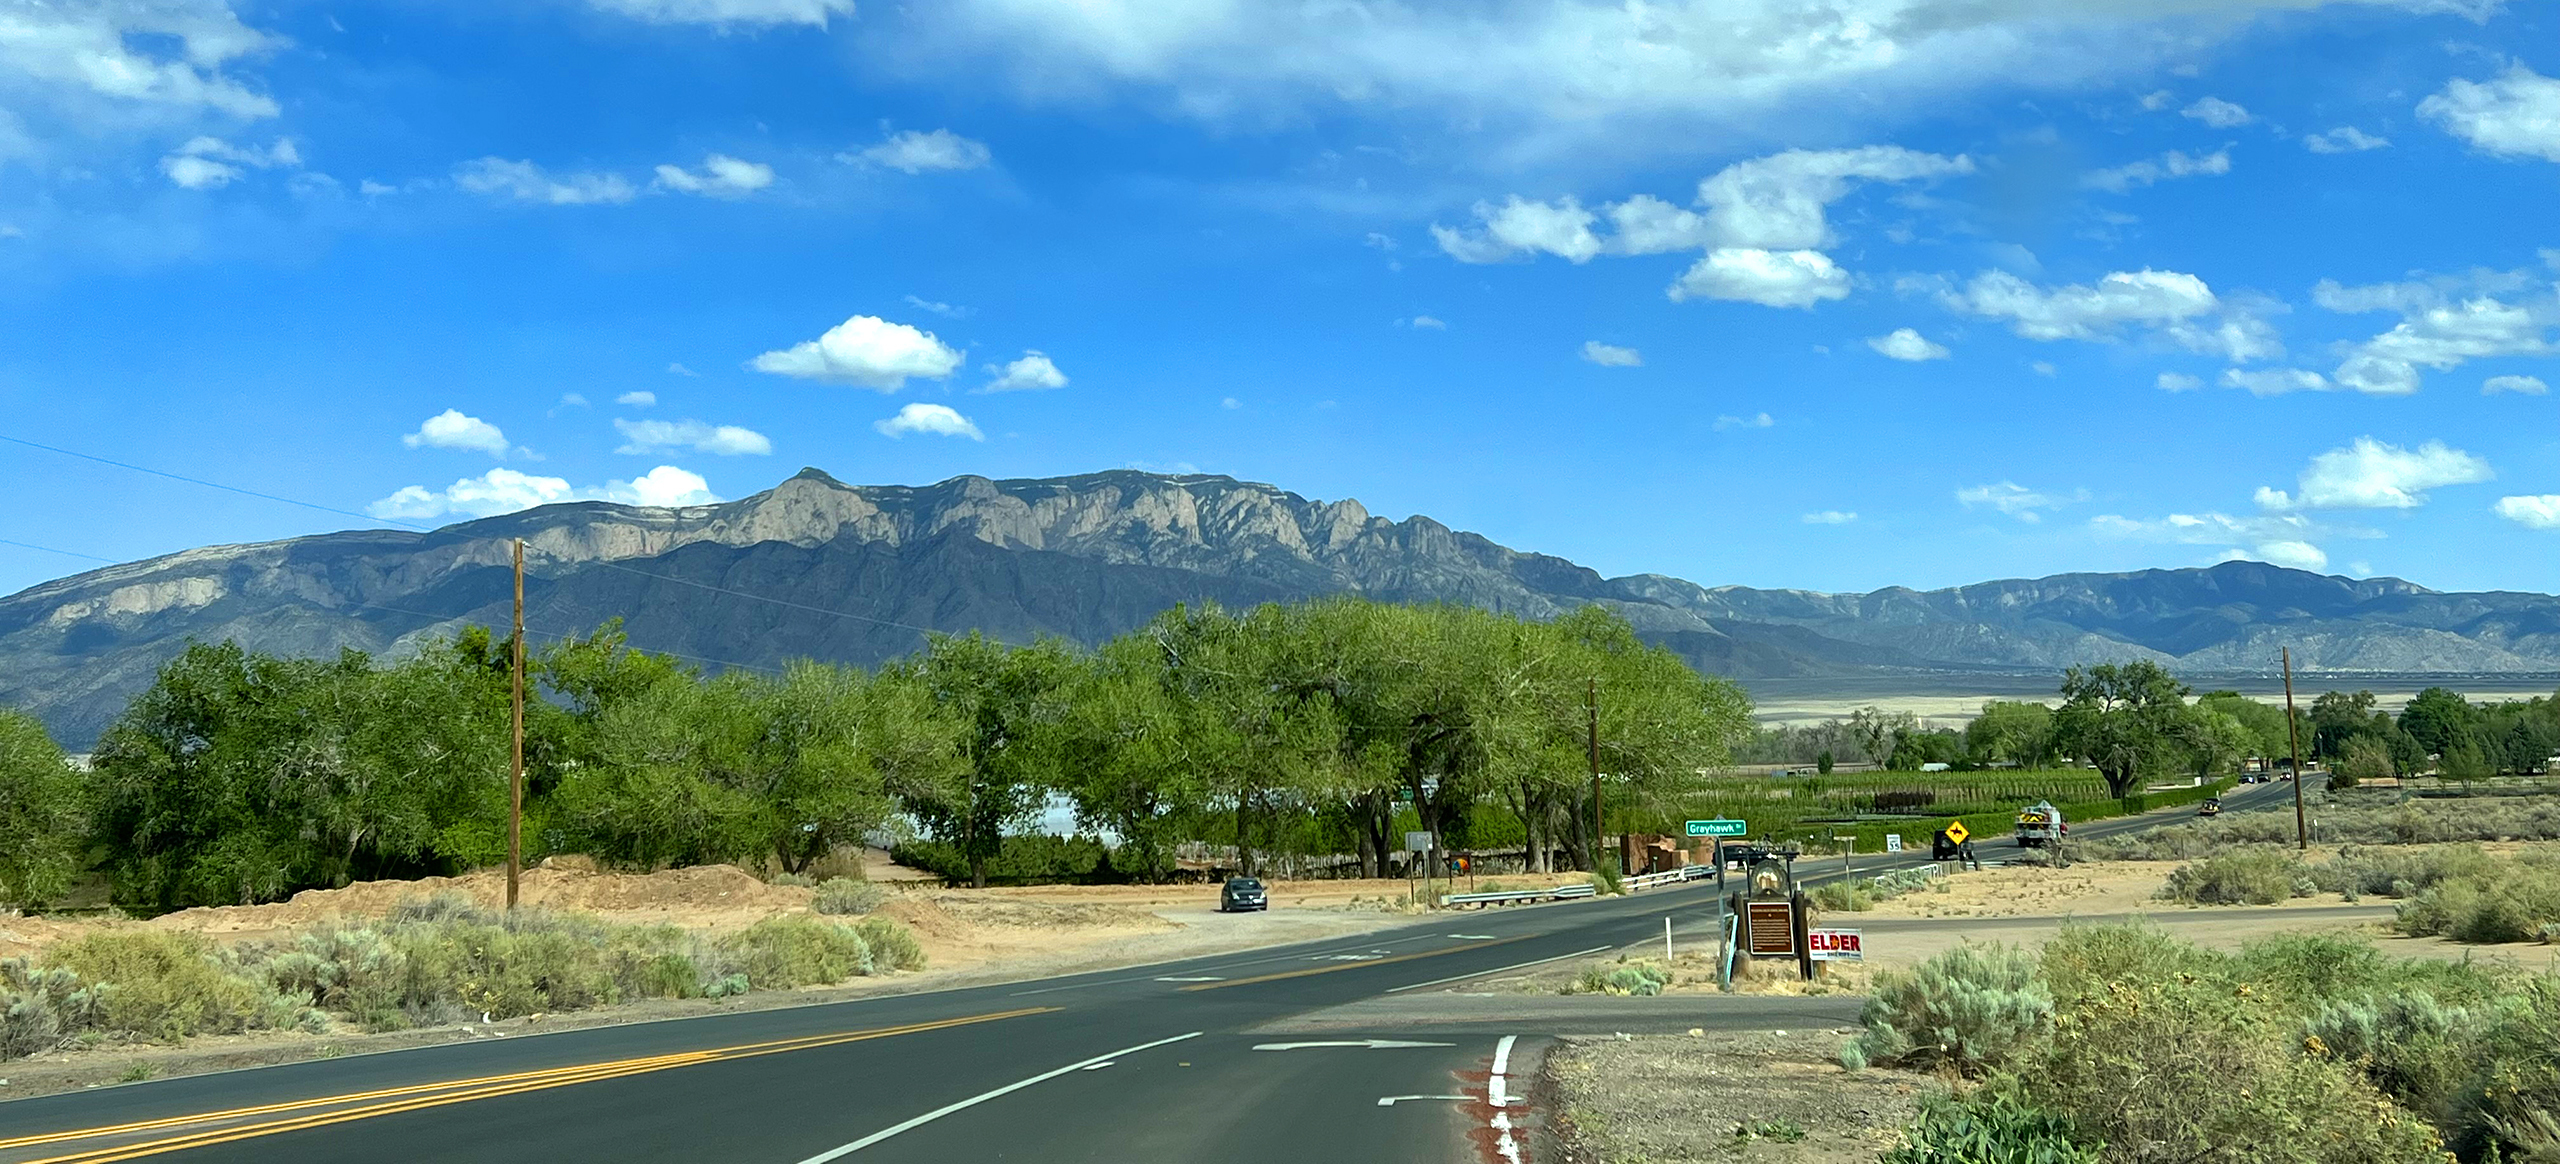 View of mountains near Corrales real estate